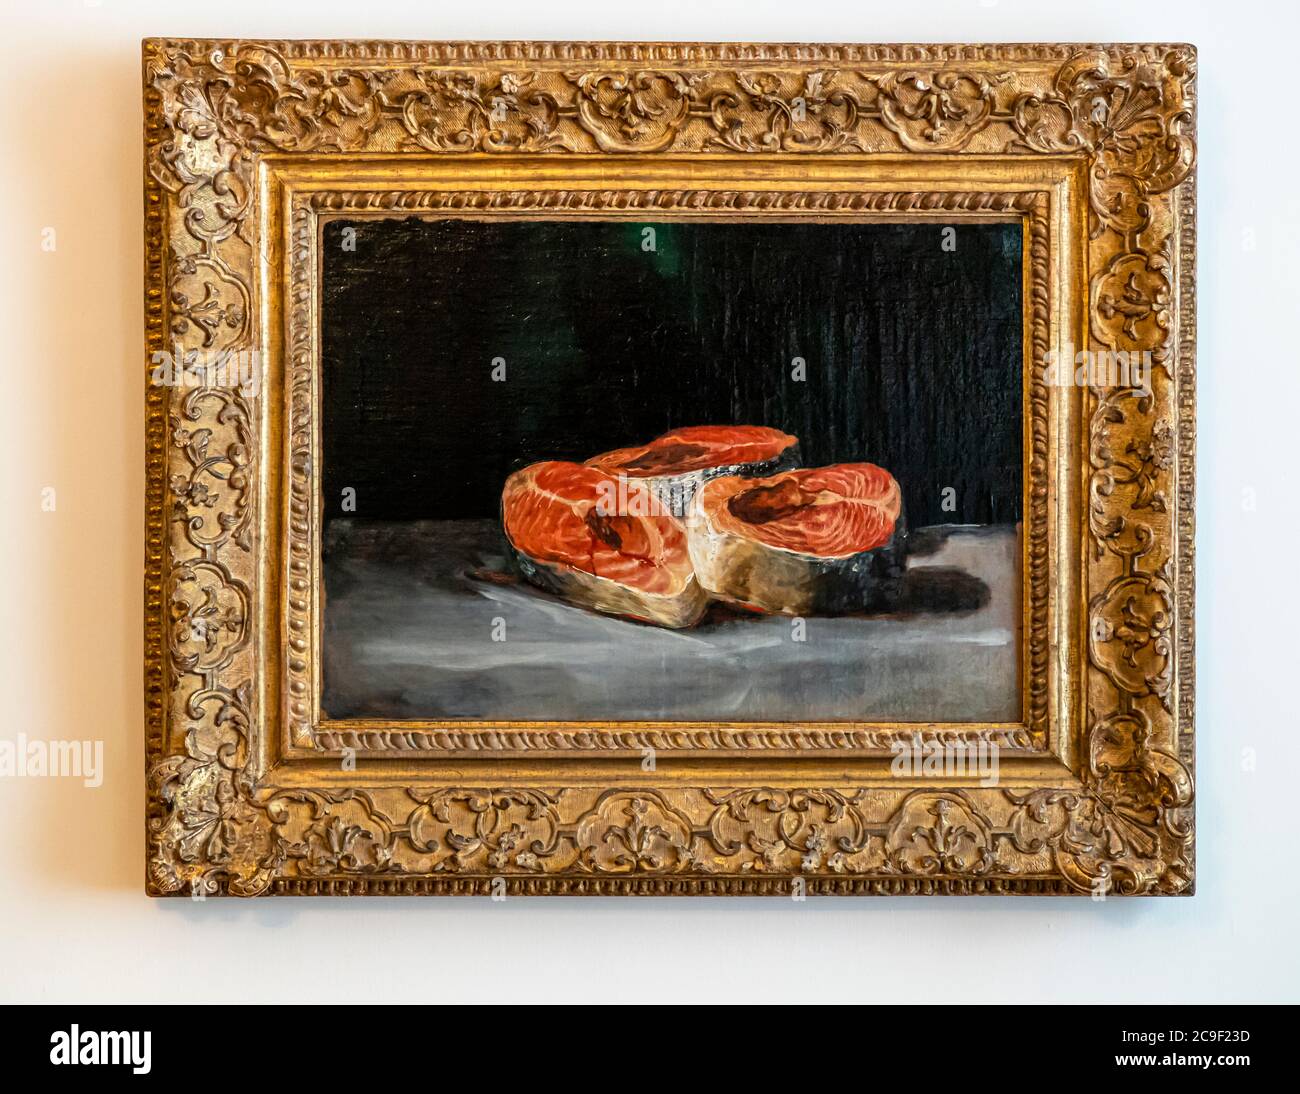 The Still Life with Three Salmon Slices by Francisco de Goya is part of the Reinhart Collection formed by Oskar Reinhart in Winterthur, Switzerland. The still life with three salmon slices was painted by Francisco de Goya over 200 years ago. Perspective and light effects are remarkable Stock Photo